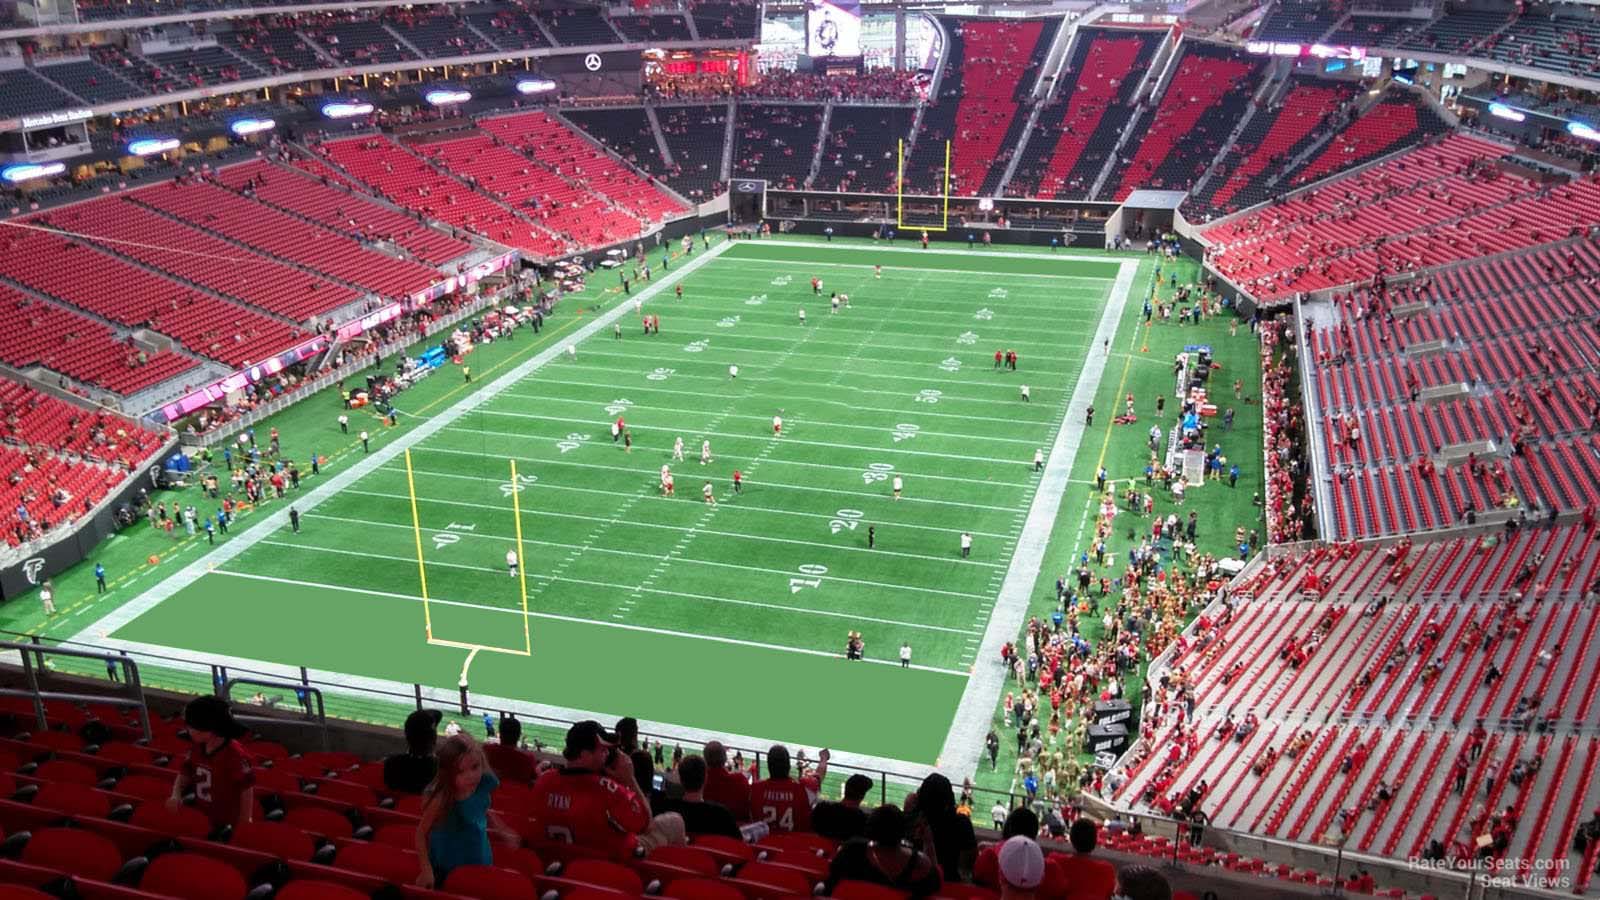 section 323, row 12 seat view  for football - mercedes-benz stadium